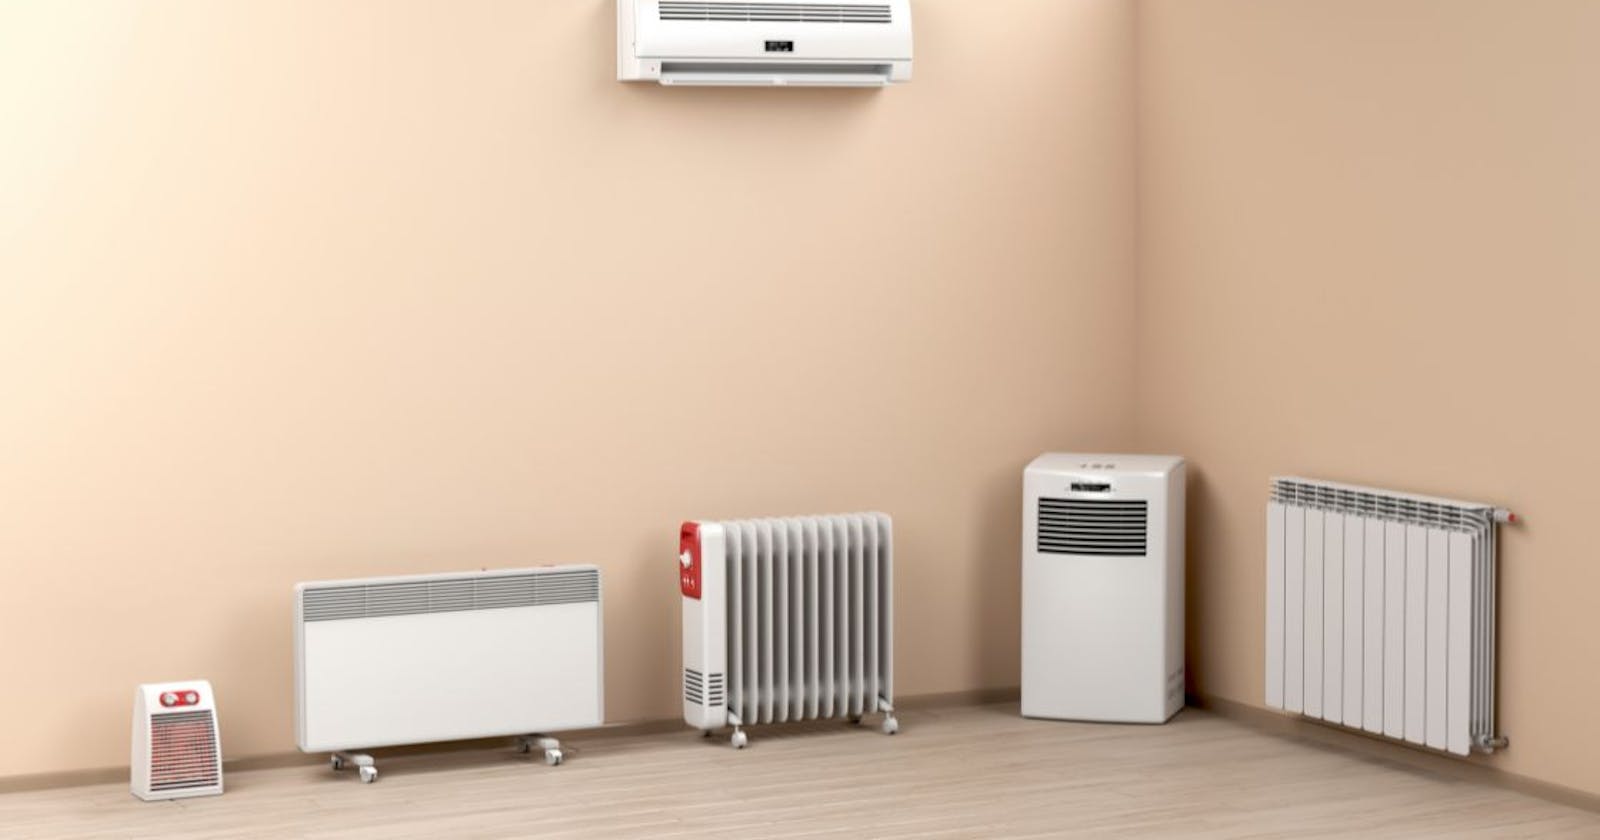 Rent or Buy: The Portable Heat Pump Dilemma Solved for Your Business